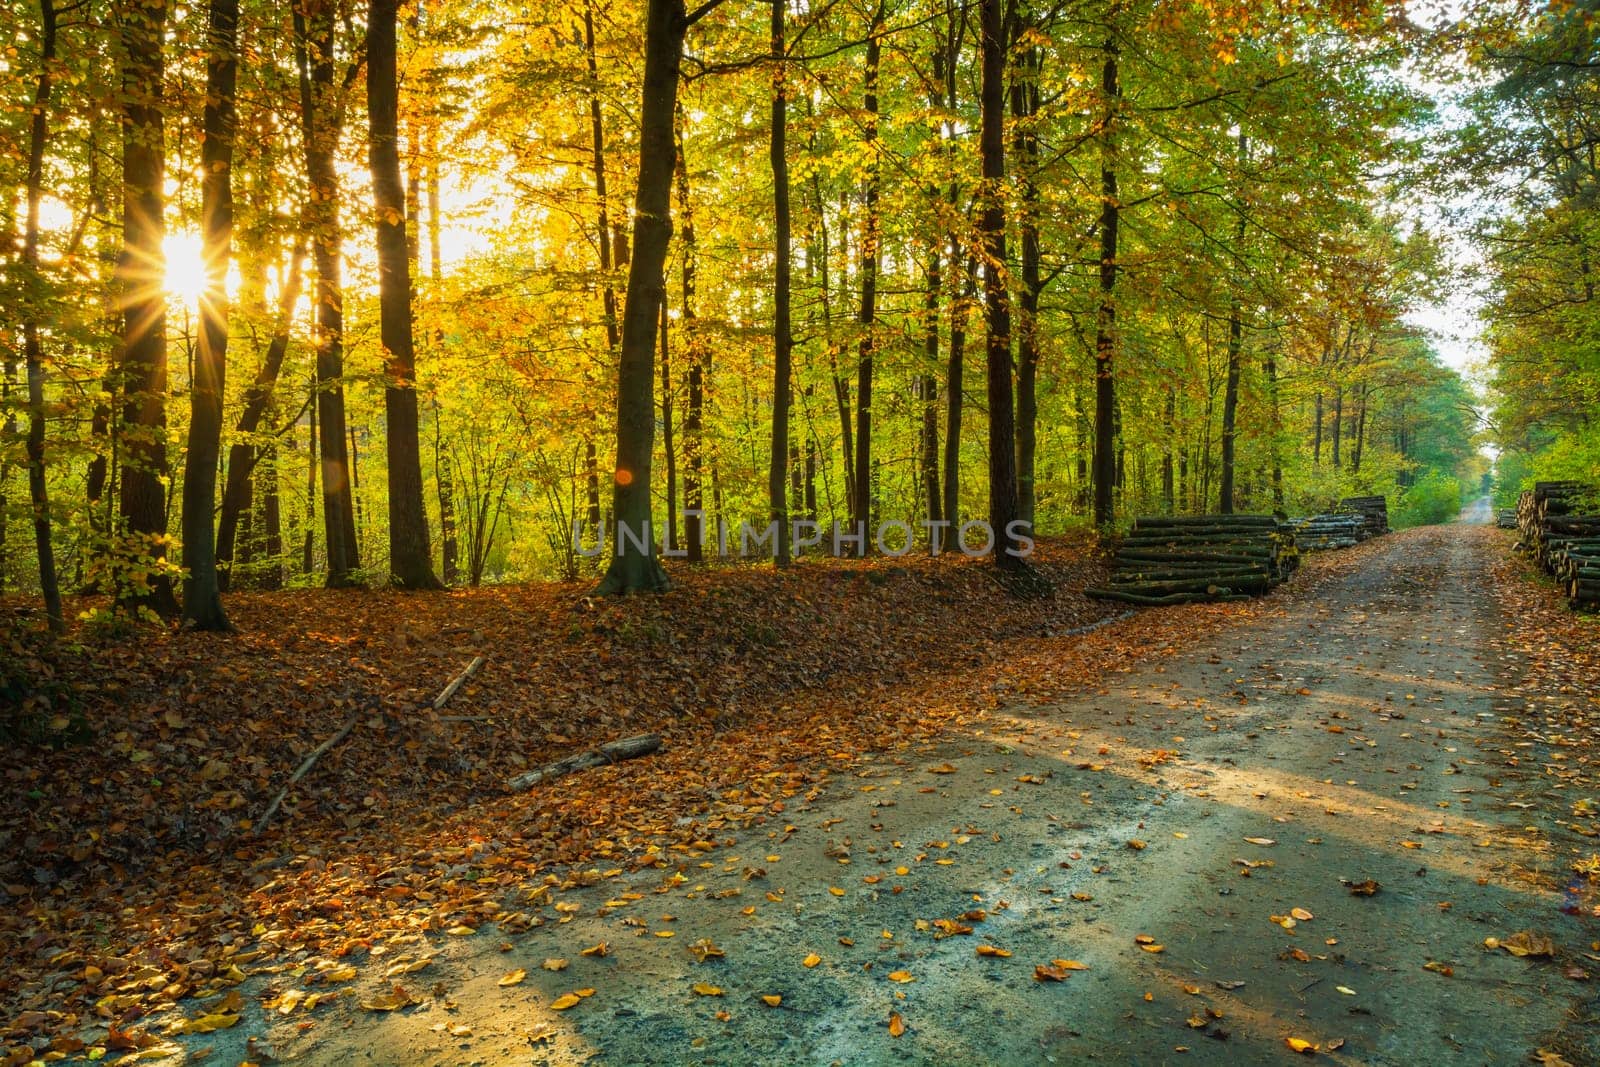 The sun in the autumn october forest with a dirt road